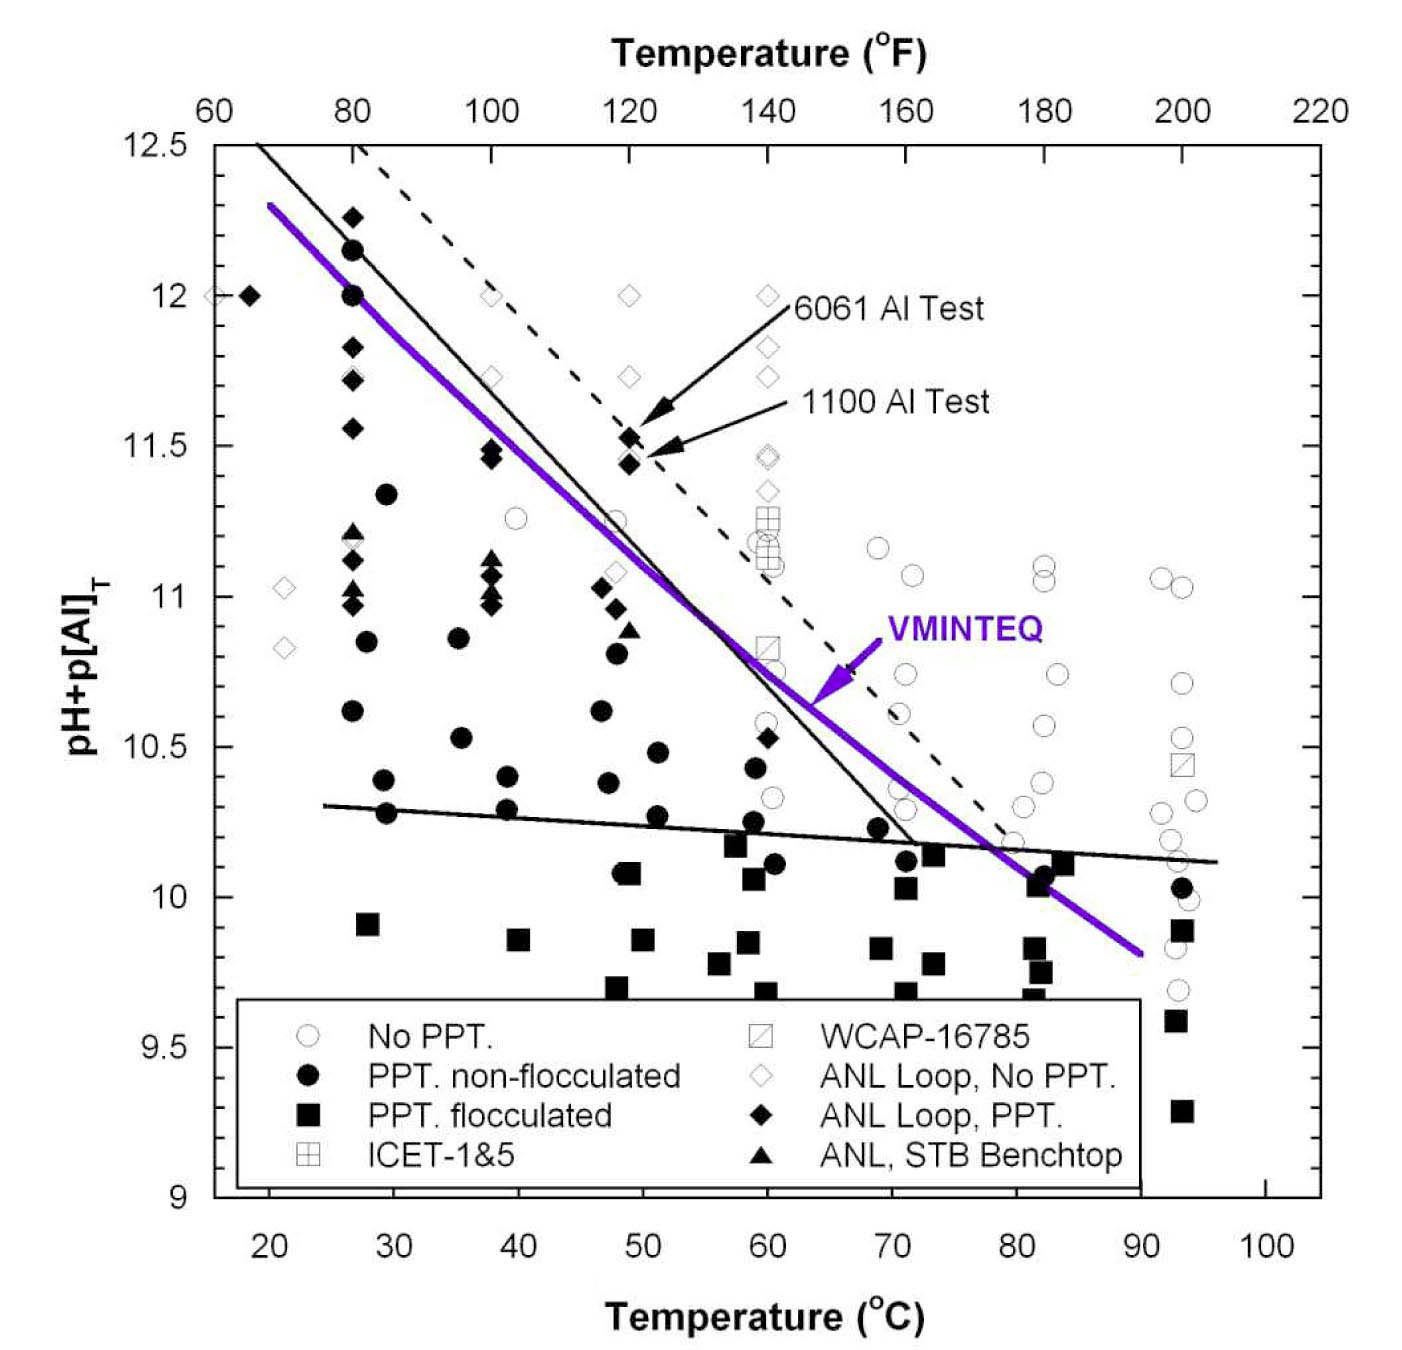 Al Hydroxide Precipitation Map in the ‘pH+p[Al]T’ vs. Temperature Domain Based on ANL’s Bench Top and Loop Test Data and Literature Data [29].